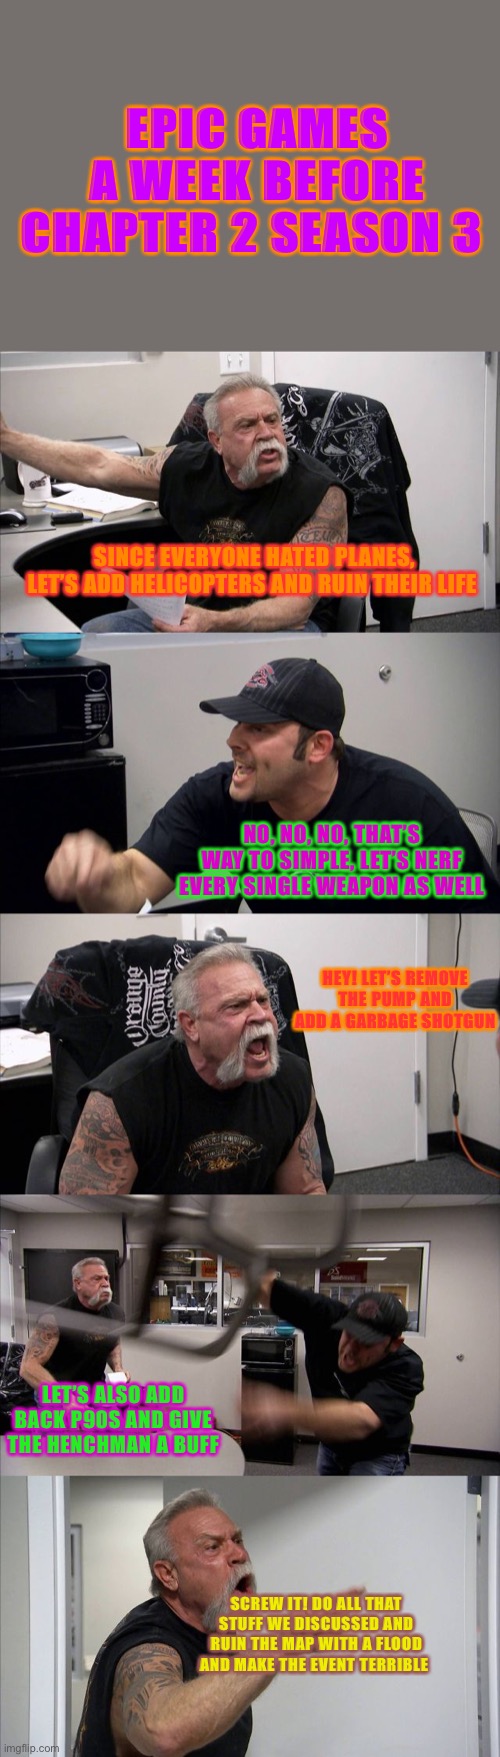 American Chopper Argument | EPIC GAMES A WEEK BEFORE CHAPTER 2 SEASON 3; SINCE EVERYONE HATED PLANES, LET’S ADD HELICOPTERS AND RUIN THEIR LIFE; NO, NO, NO, THAT’S WAY TO SIMPLE, LET’S NERF EVERY SINGLE WEAPON AS WELL; HEY! LET’S REMOVE THE PUMP AND ADD A GARBAGE SHOTGUN; LET’S ALSO ADD BACK P90S AND GIVE THE HENCHMAN A BUFF; SCREW IT! DO ALL THAT STUFF WE DISCUSSED AND RUIN THE MAP WITH A FLOOD AND MAKE THE EVENT TERRIBLE | image tagged in memes,american chopper argument | made w/ Imgflip meme maker